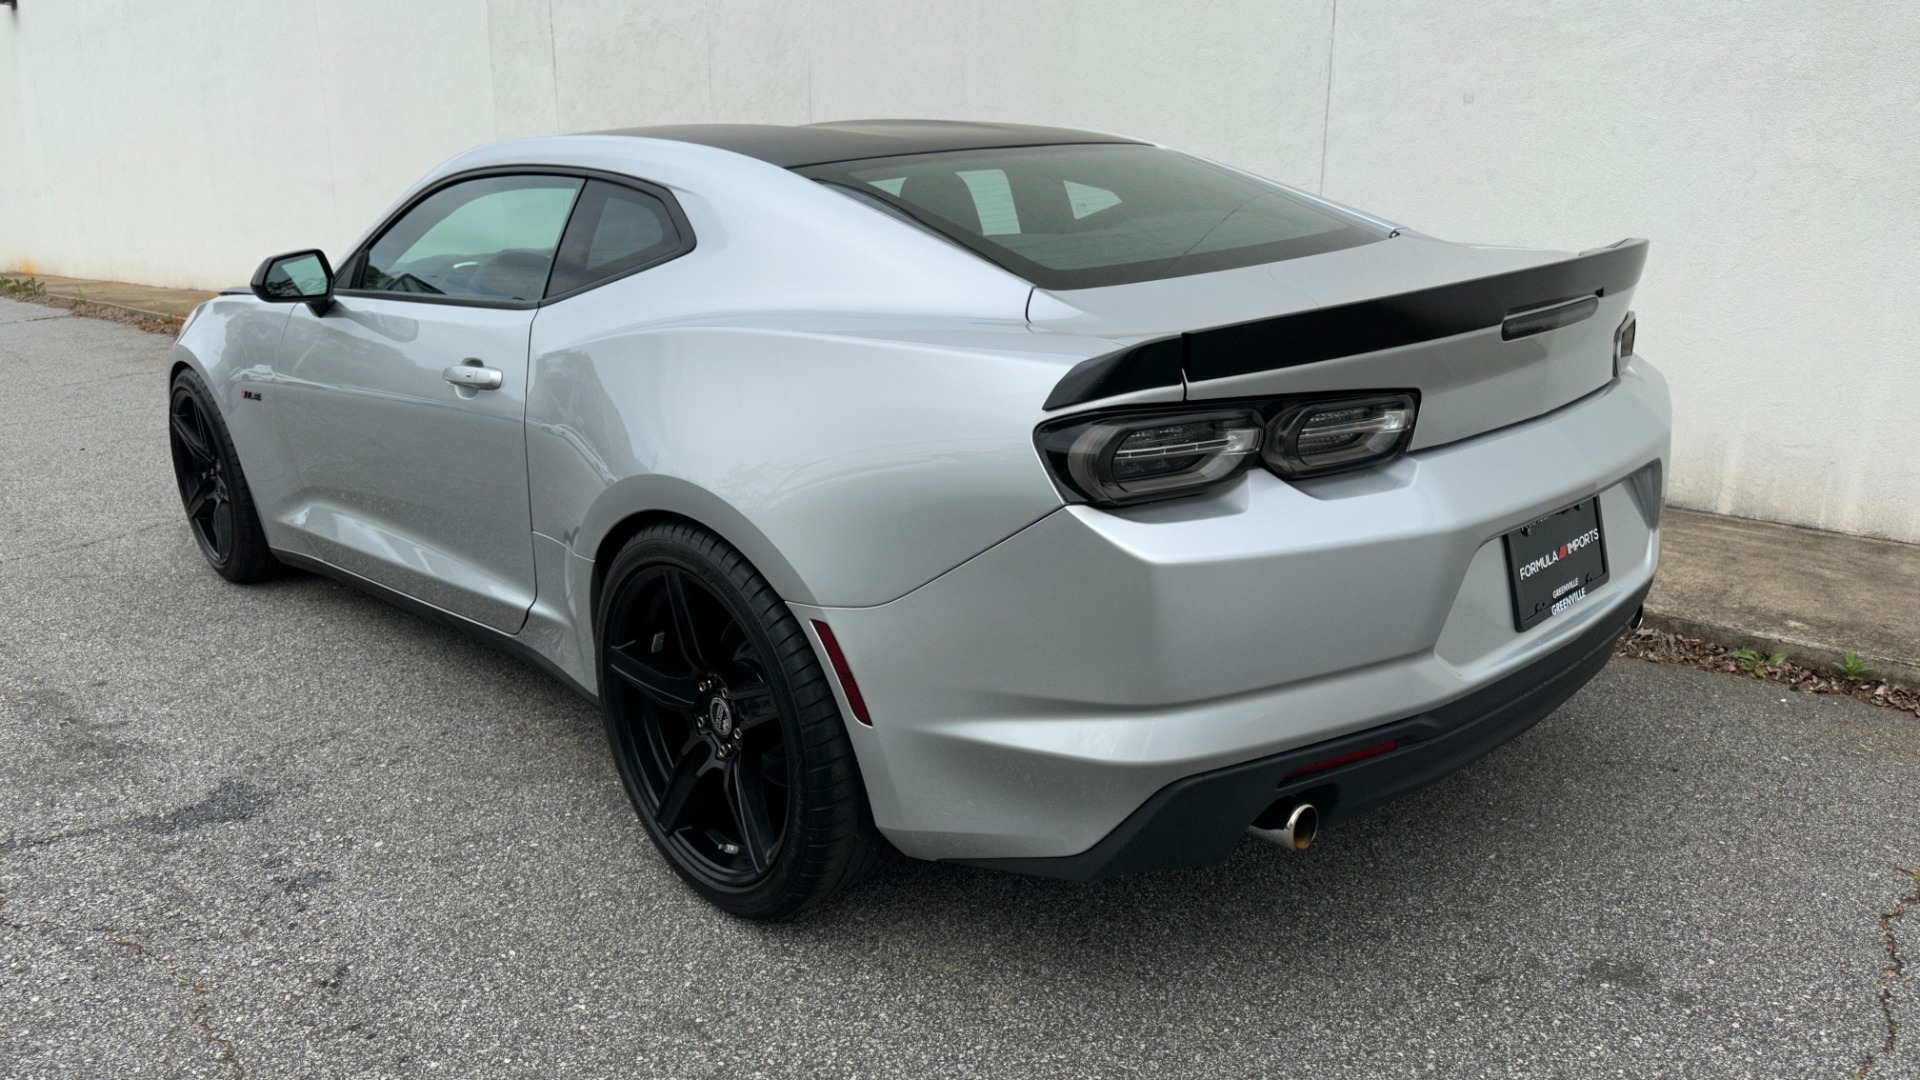 Used 2019 Chevrolet Camaro 2LT / 6SPD MANUAL / RECARO SEATS / UPGRADED WHEELS for sale $29,900 at Formula Imports in Charlotte NC 28227 4